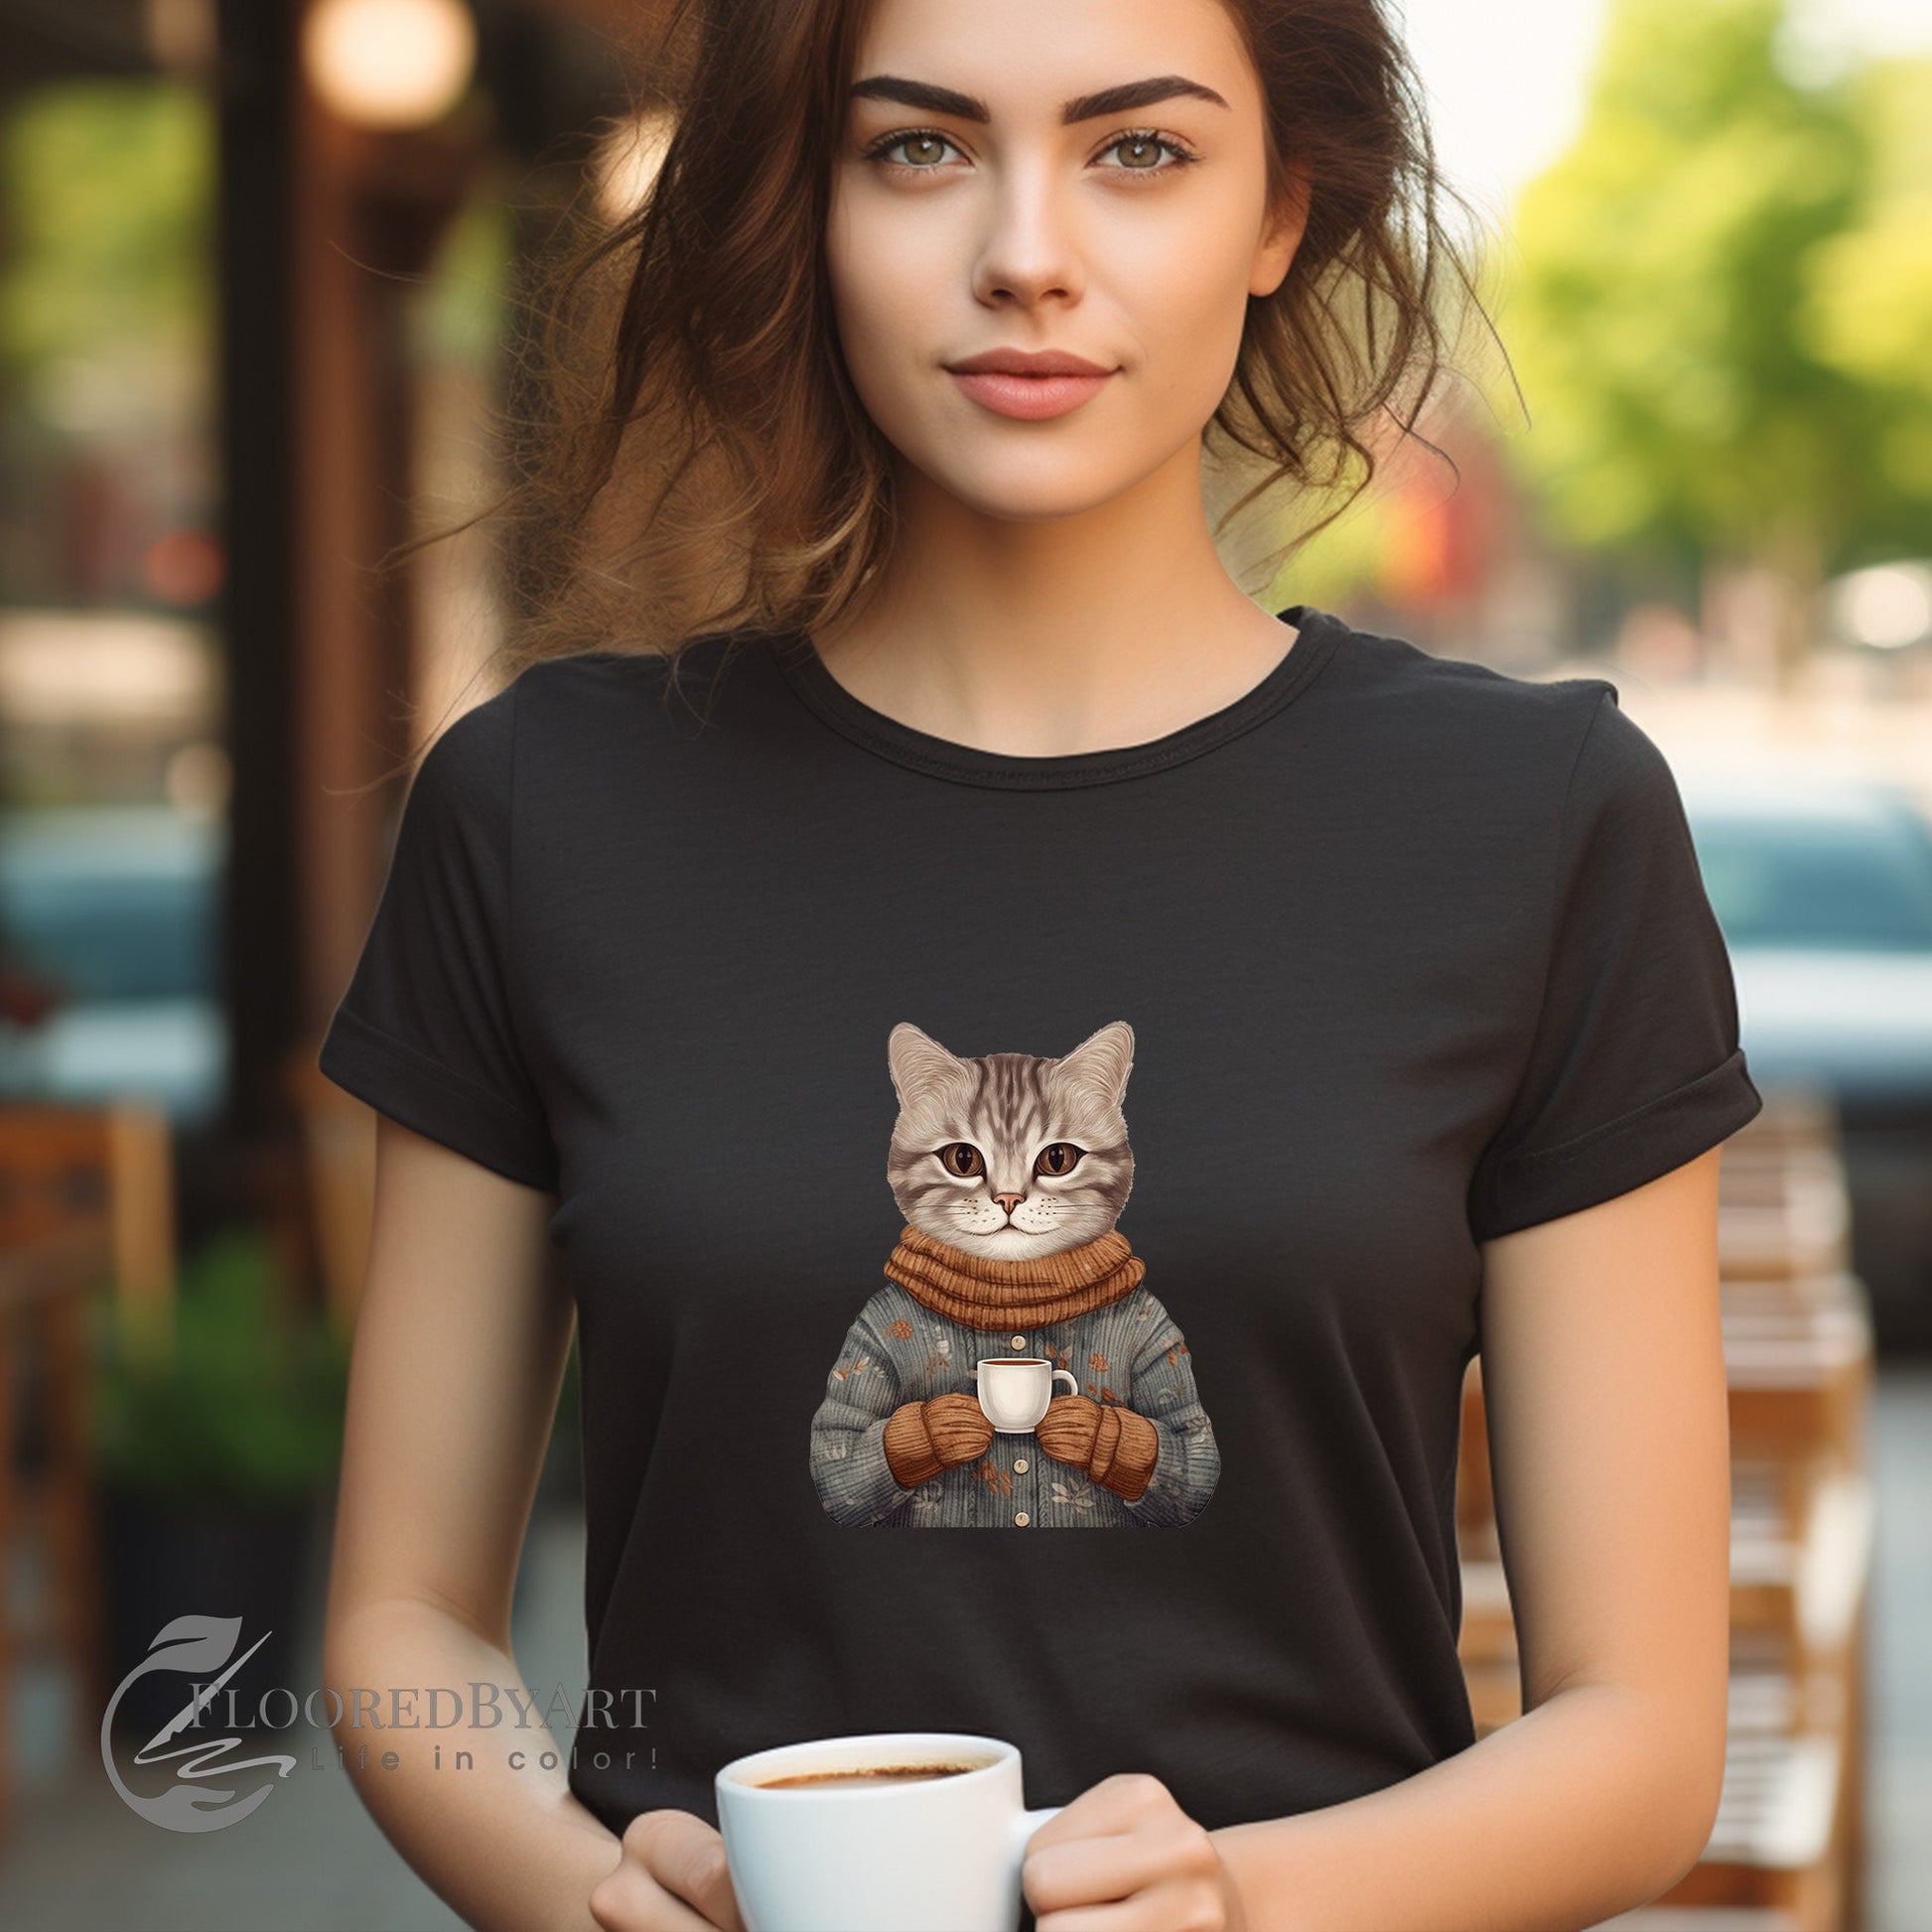 Cute Cat T-Shirt, Artistic Illustration of a Cat in a T-Shirt, Beautiful Astethic Cat Drawing - FlooredByArt